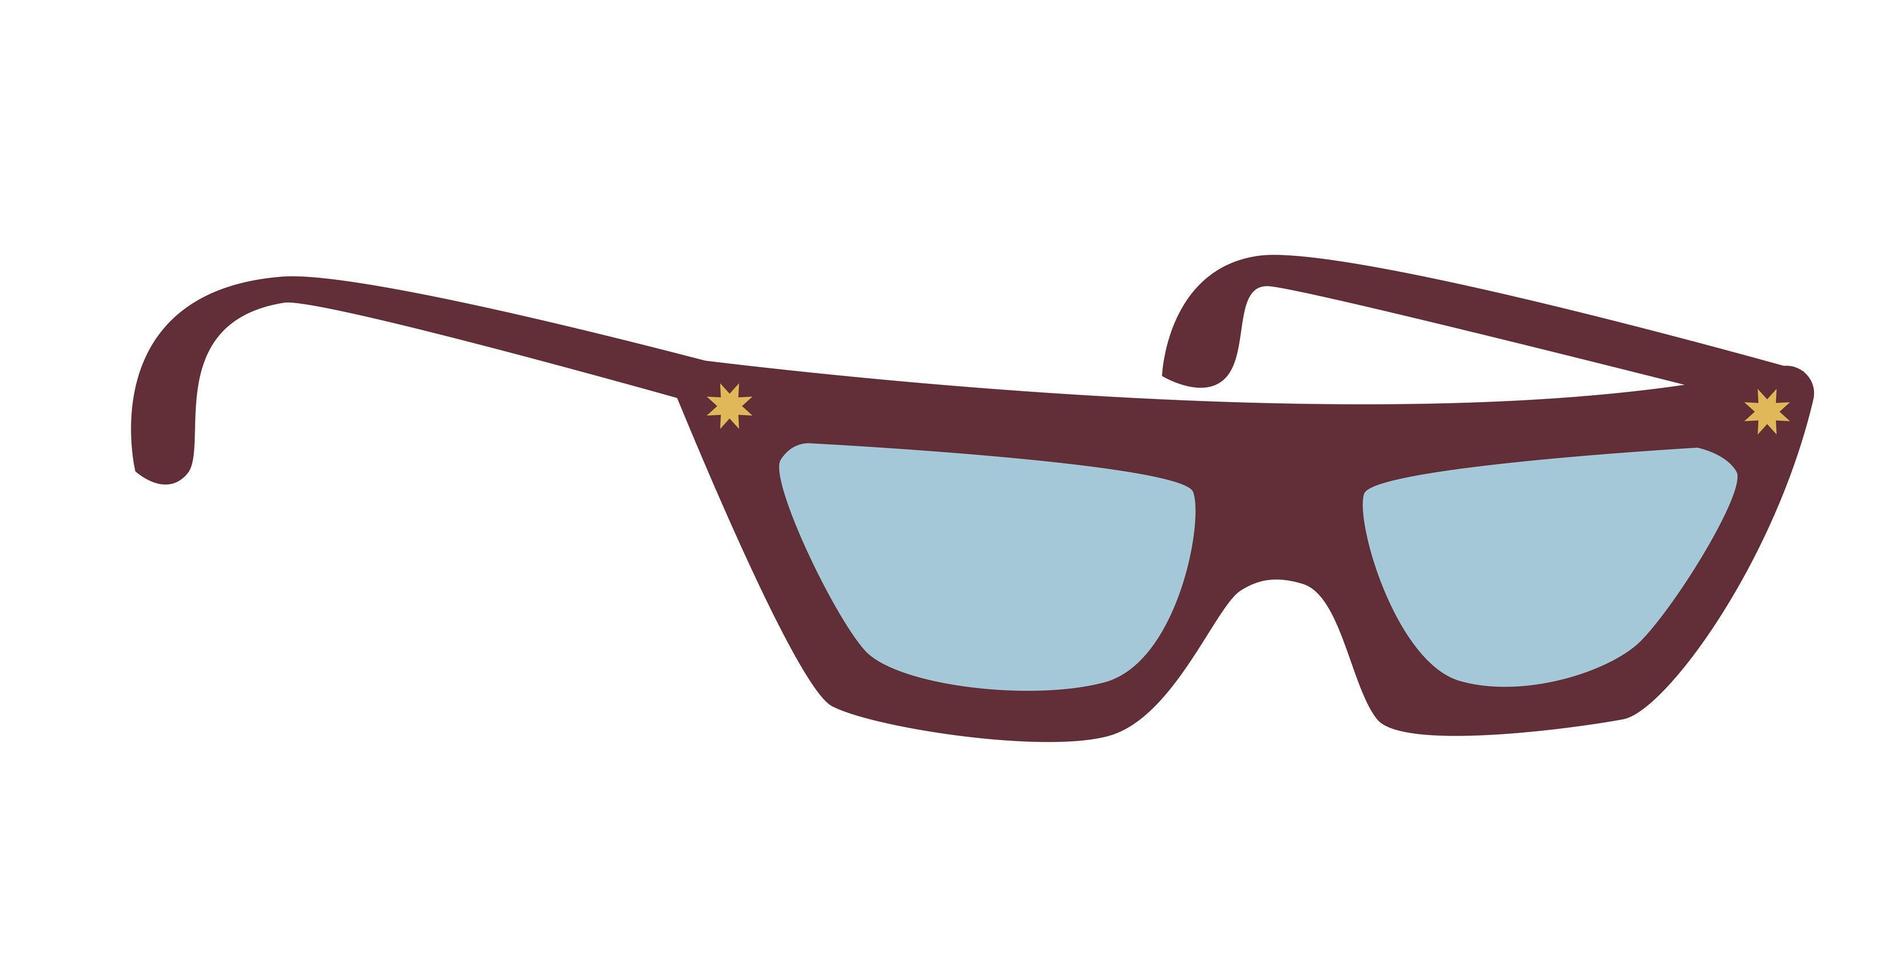 Thick-framed glasses. Fashionable style of streets. Vector illustration in flat style